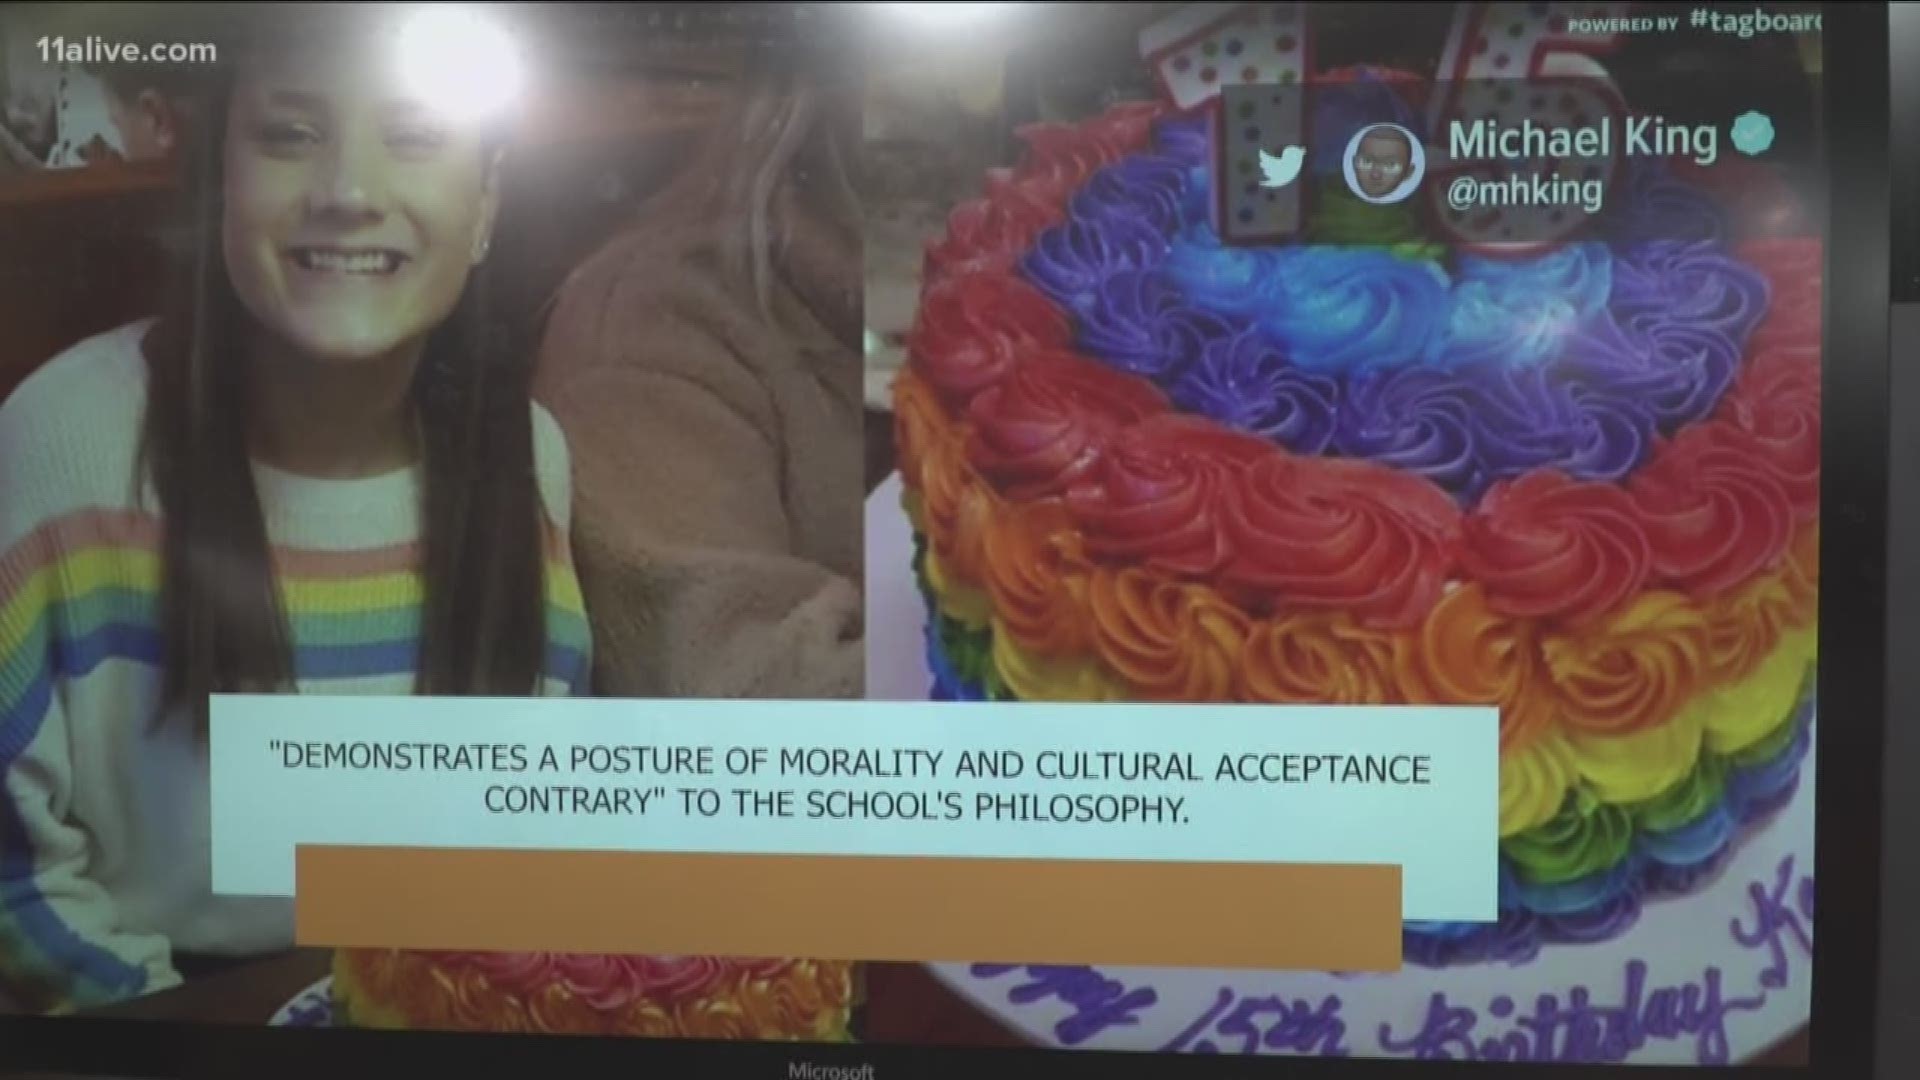 In a statement shared with NBC News, the Kentucky school said that the rainbow-filled photo was just the last straw following two years of student code violations.